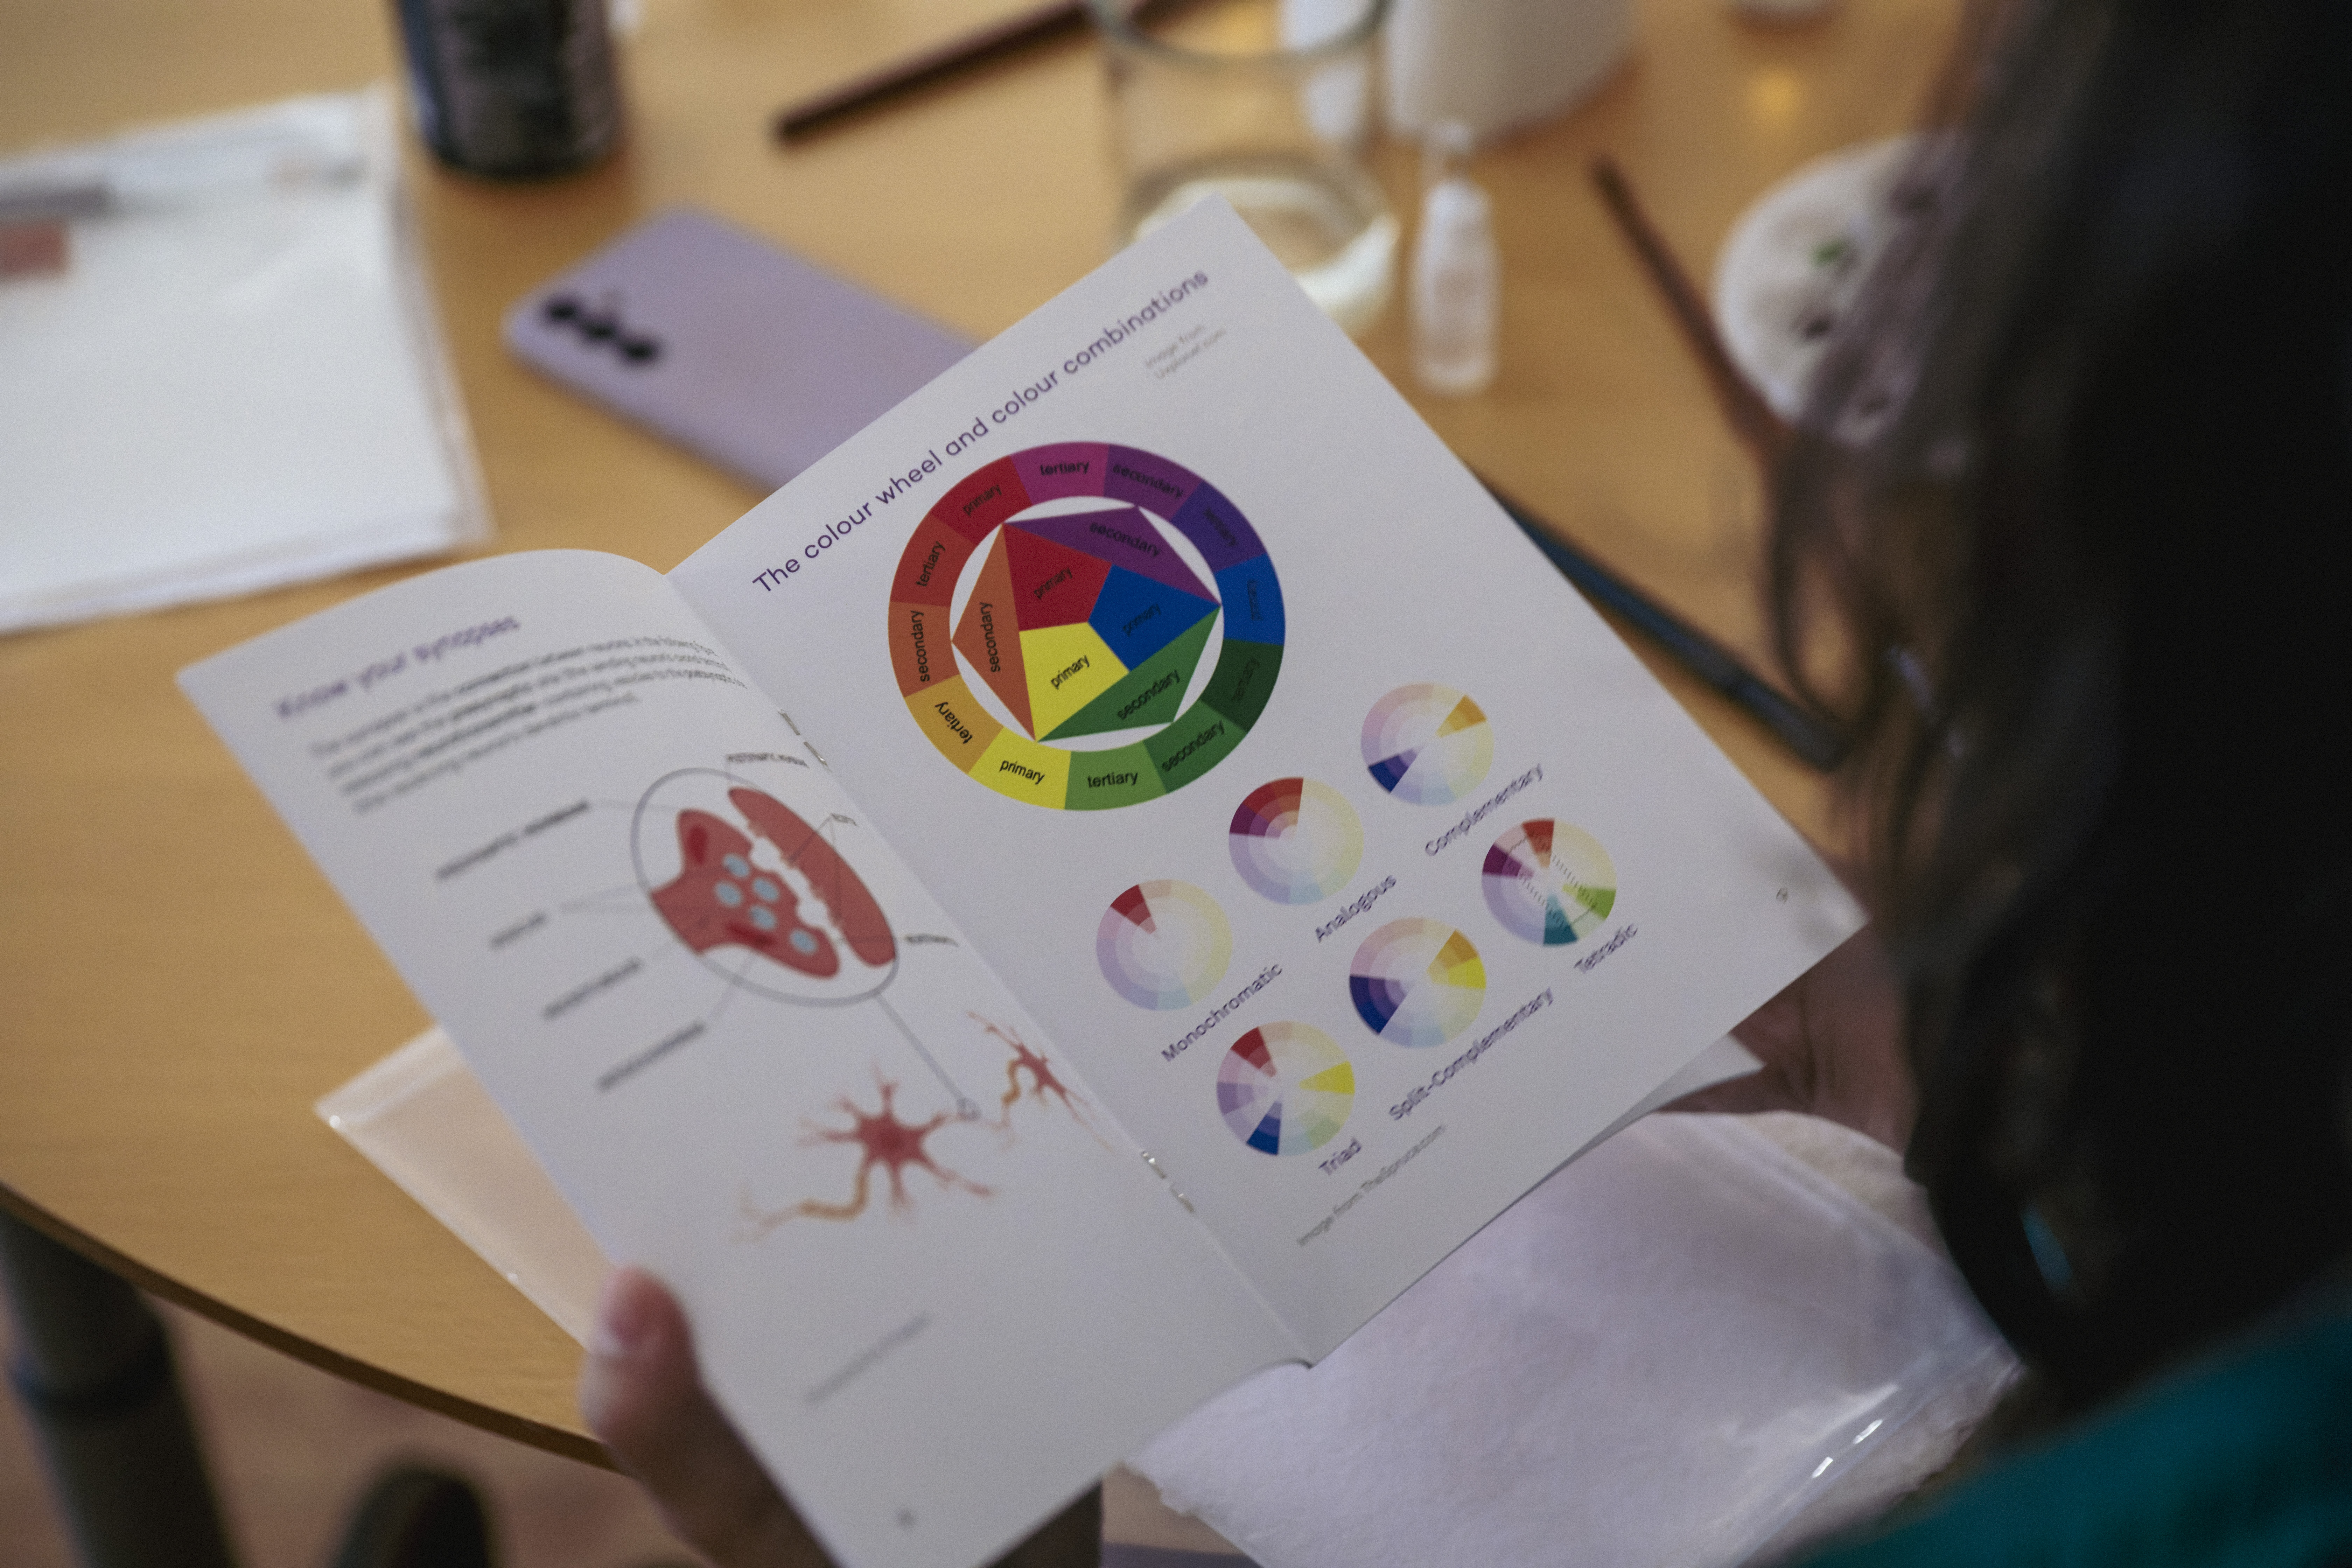 The event included a brochure with visual explanations of both the brain and colors